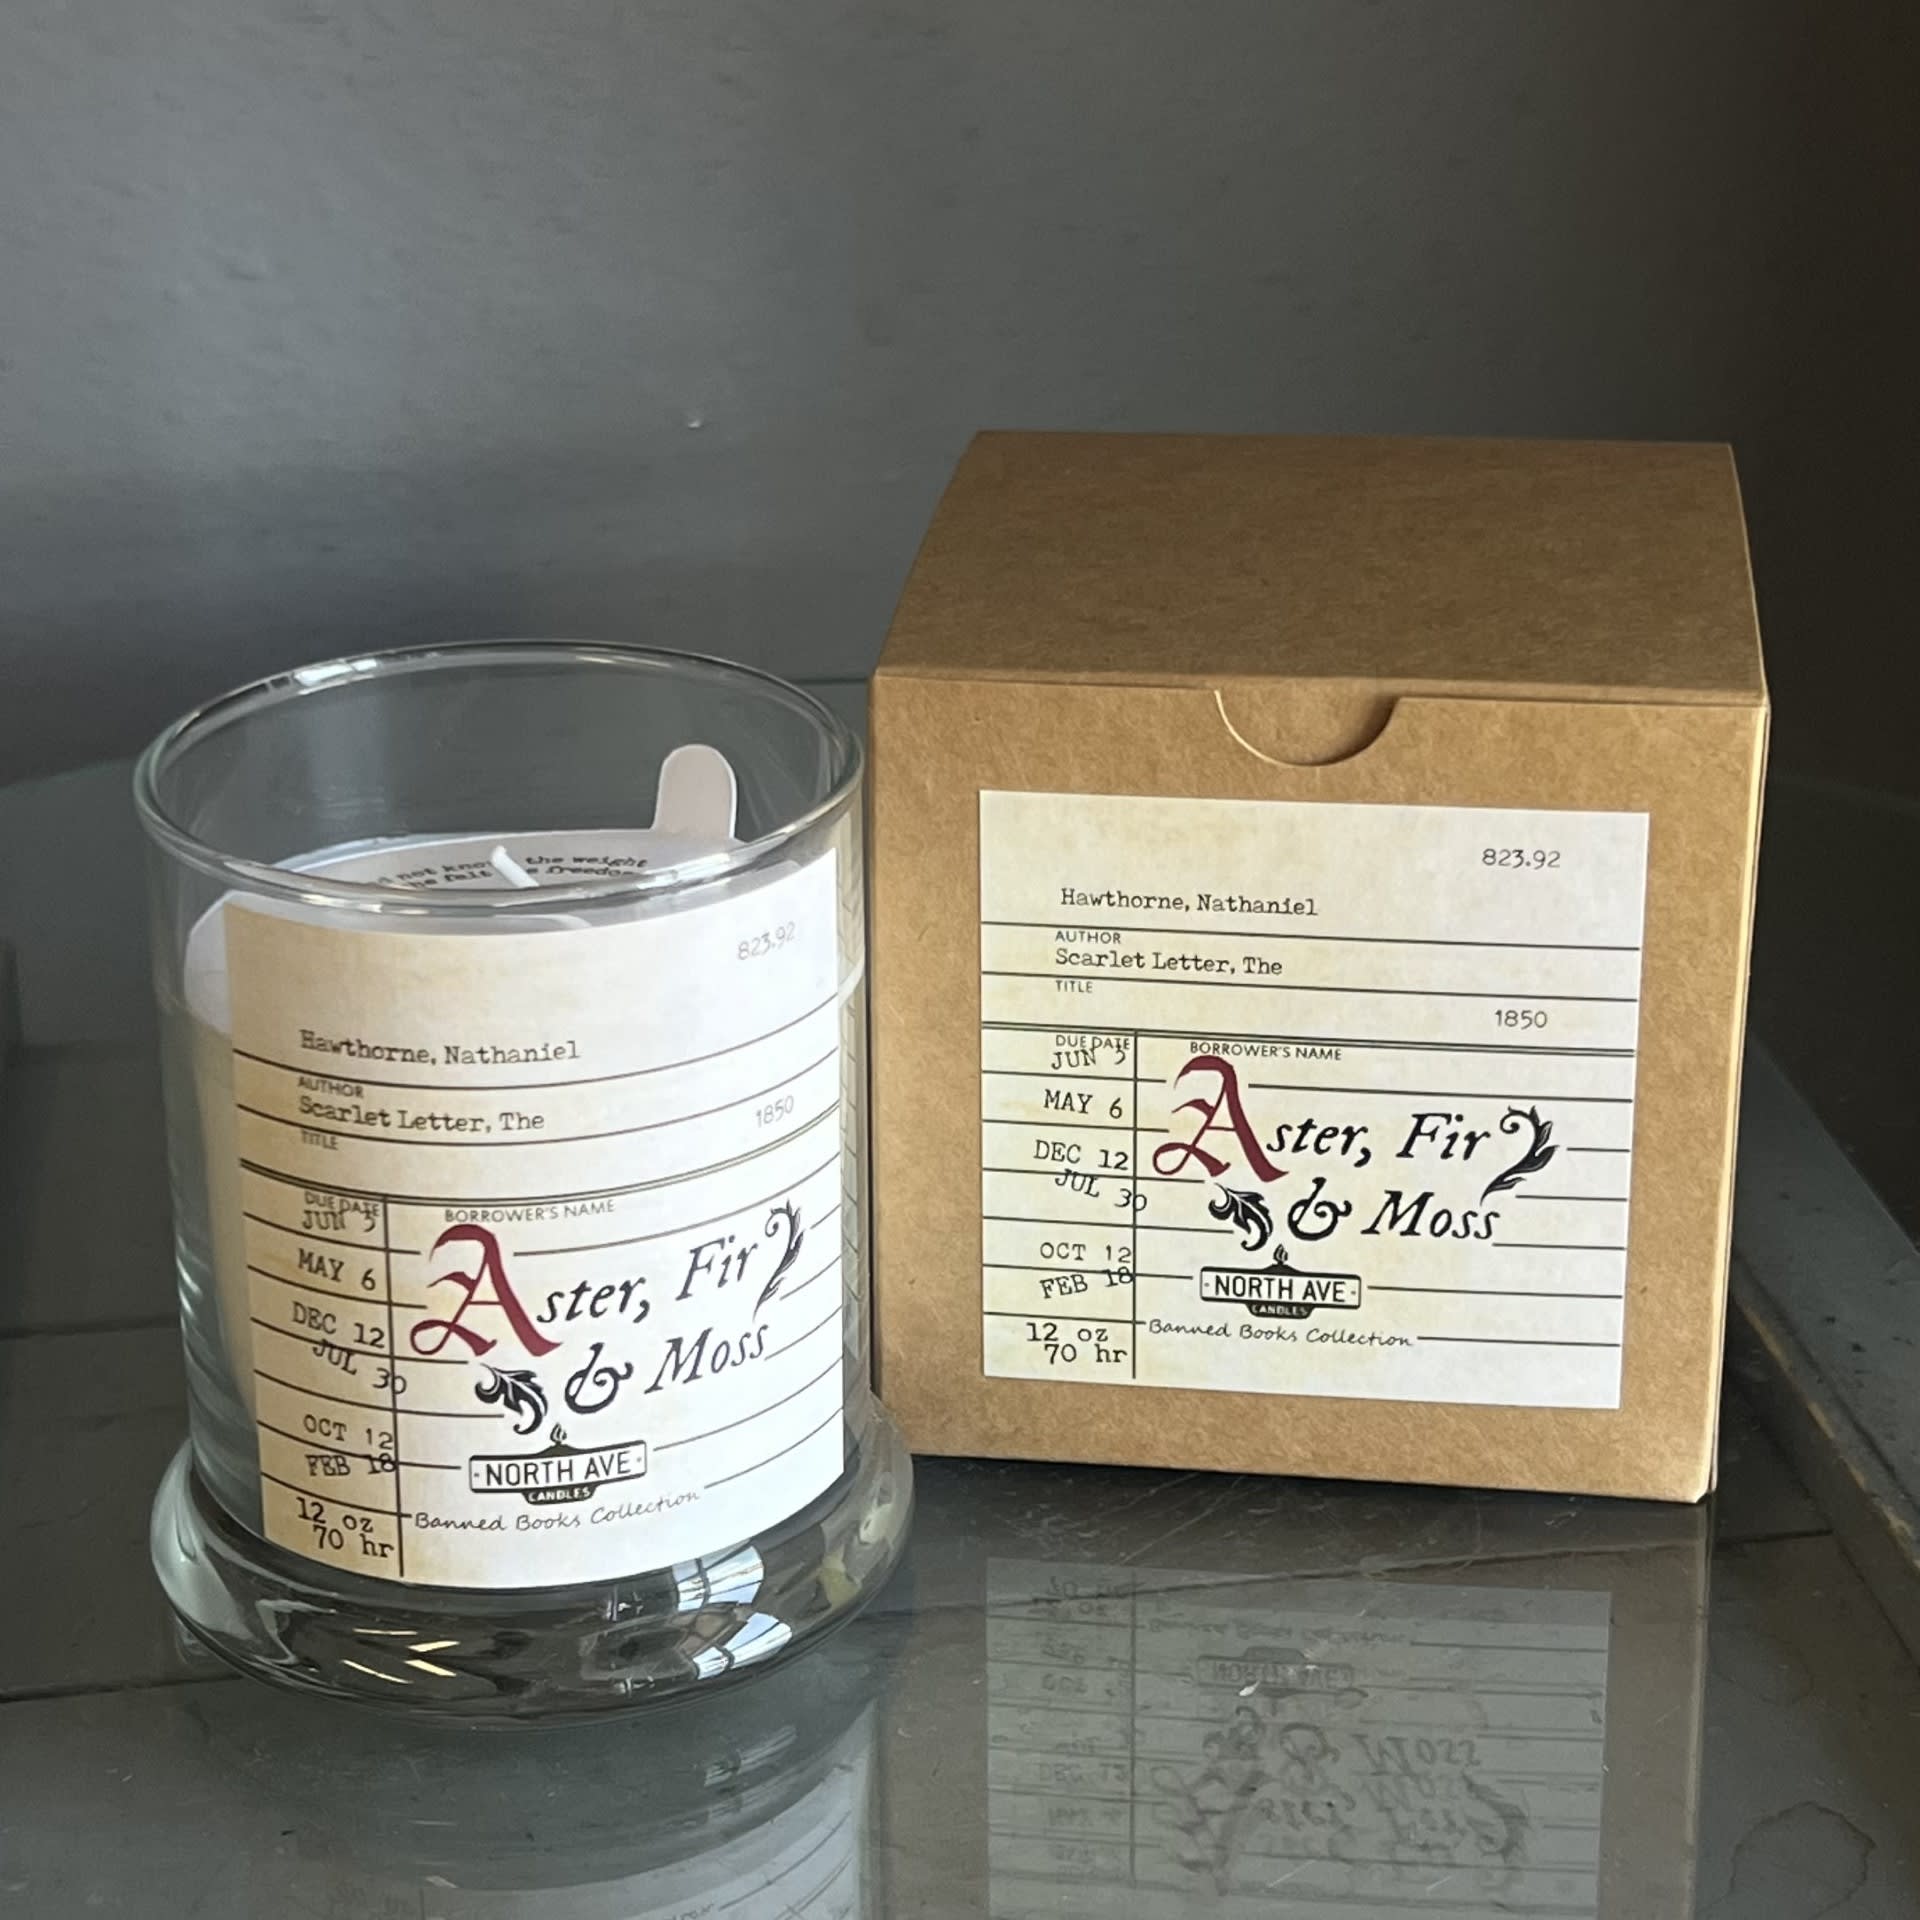 The Scarlet Letter Candle  - This candle is based off of the classic book by Nathaniel Hawthorne, and is scented as Aster, fir, and moss. This fun themed candle is a perfect birthday, holiday or anniversary gift for your book-loving loved one! 